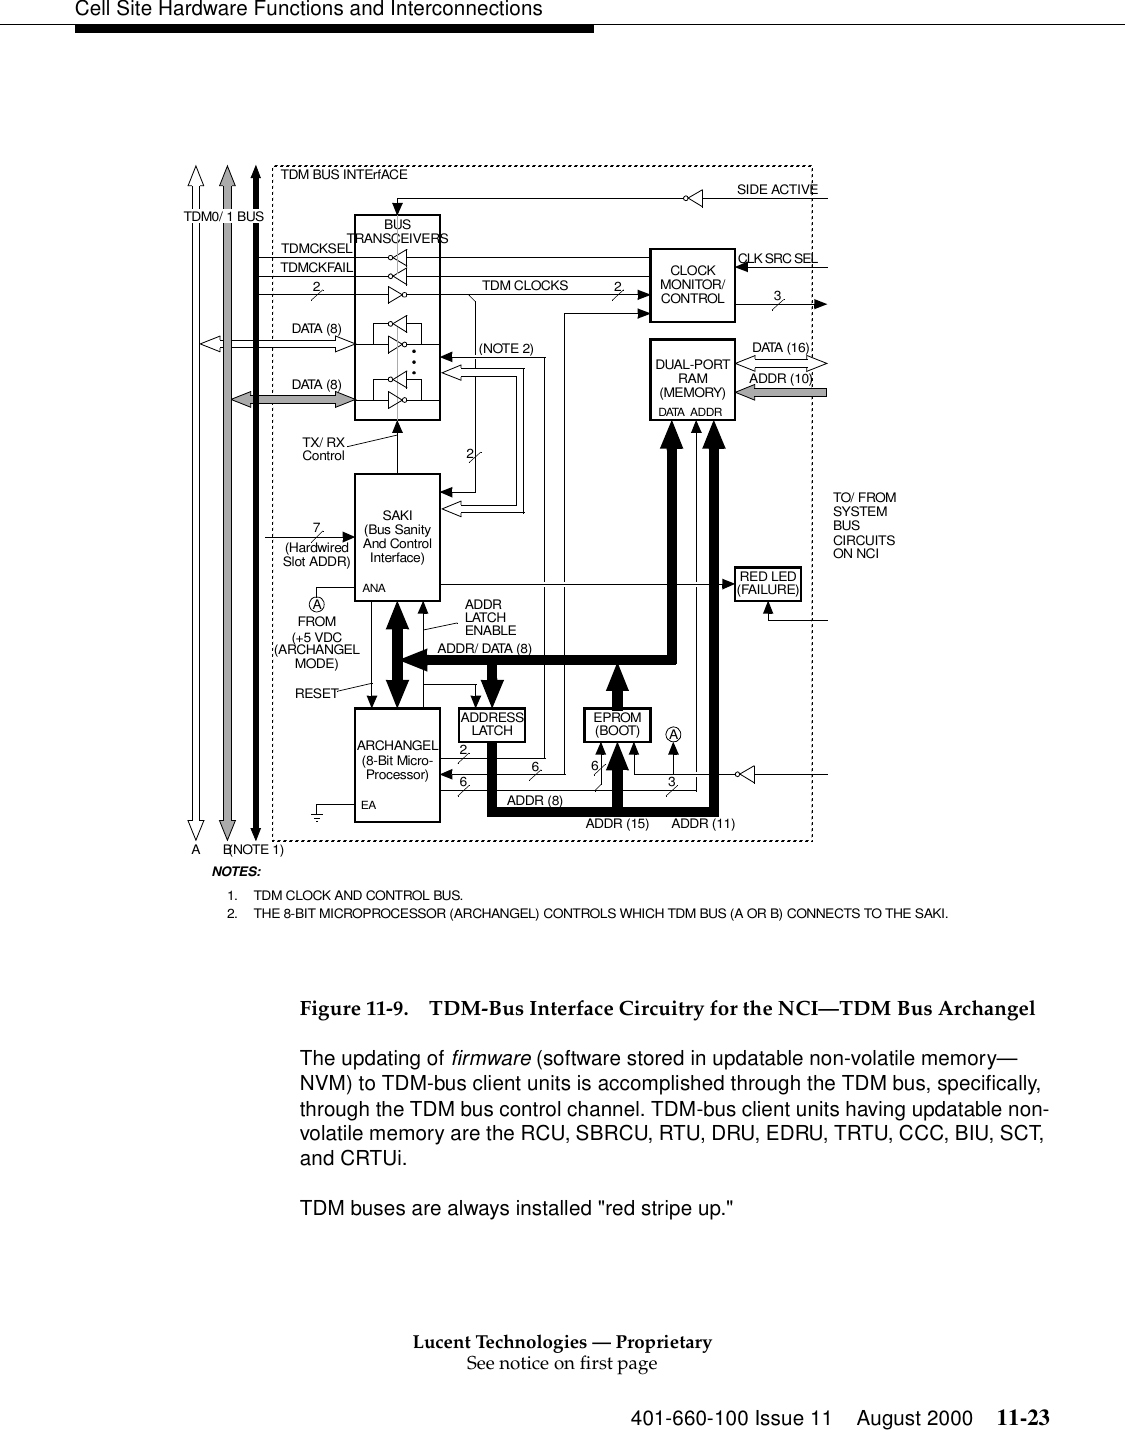 Lucent Technologies — ProprietarySee notice on first page401-660-100 Issue 11 August 2000 11-23Cell Site Hardware Functions and InterconnectionsFigure 11-9. TDM-Bus Interface Circuitry for the NCI—TDM Bus ArchangelThe updating of firmware (software stored in updatable non-volatile memory—NVM) to TDM-bus client units is accomplished through the TDM bus, specifically, through the TDM bus control channel. TDM-bus client units having updatable non-volatile memory are the RCU, SBRCU, RTU, DRU, EDRU, TRTU, CCC, BIU, SCT, and CRTUi.TDM buses are always installed &quot;red stripe up.&quot;RED LED(FAILURE)BUSTRANSCEIVERSDUAL-PORTRAM(8-Bit Micro-Processor)SAKI(Bus SanityAnd ControlInterface)ADDRESSLATCH EPROM(BOOT)TDM CLOCKS62ADDR (15)ADDR/ DATA (8)TO/ FROMSYSTEMBUSADDR (8)TDM CLOCK AND CONTROL BUS.THE 8-BIT MICROPROCESSOR (ARCHANGEL) CONTROLS WHICH TDM BUS (A OR B) CONNECTS TO THE SAKI.6NOTES:1.2.ANAEA(MEMORY)CIRCUITSADDRLATCHENABLECLOCKMONITOR/CONTROLADDR (11)ON NCI236(NOTE 2)2ADDRDATADATA (8)DATA (8)RESETTX/ RXControl(HardwiredSlot ADDR)7TDM BUS INTErfACETDM0/ 1 BUSAB(NOTE 1)TDMCKFAILTDMCKSELA(+5 VDC(ARCHANGELMODE)FROMSIDE ACTIVE2ADDR (10)DATA (16)3ACLK SRC SELARCHANGEL